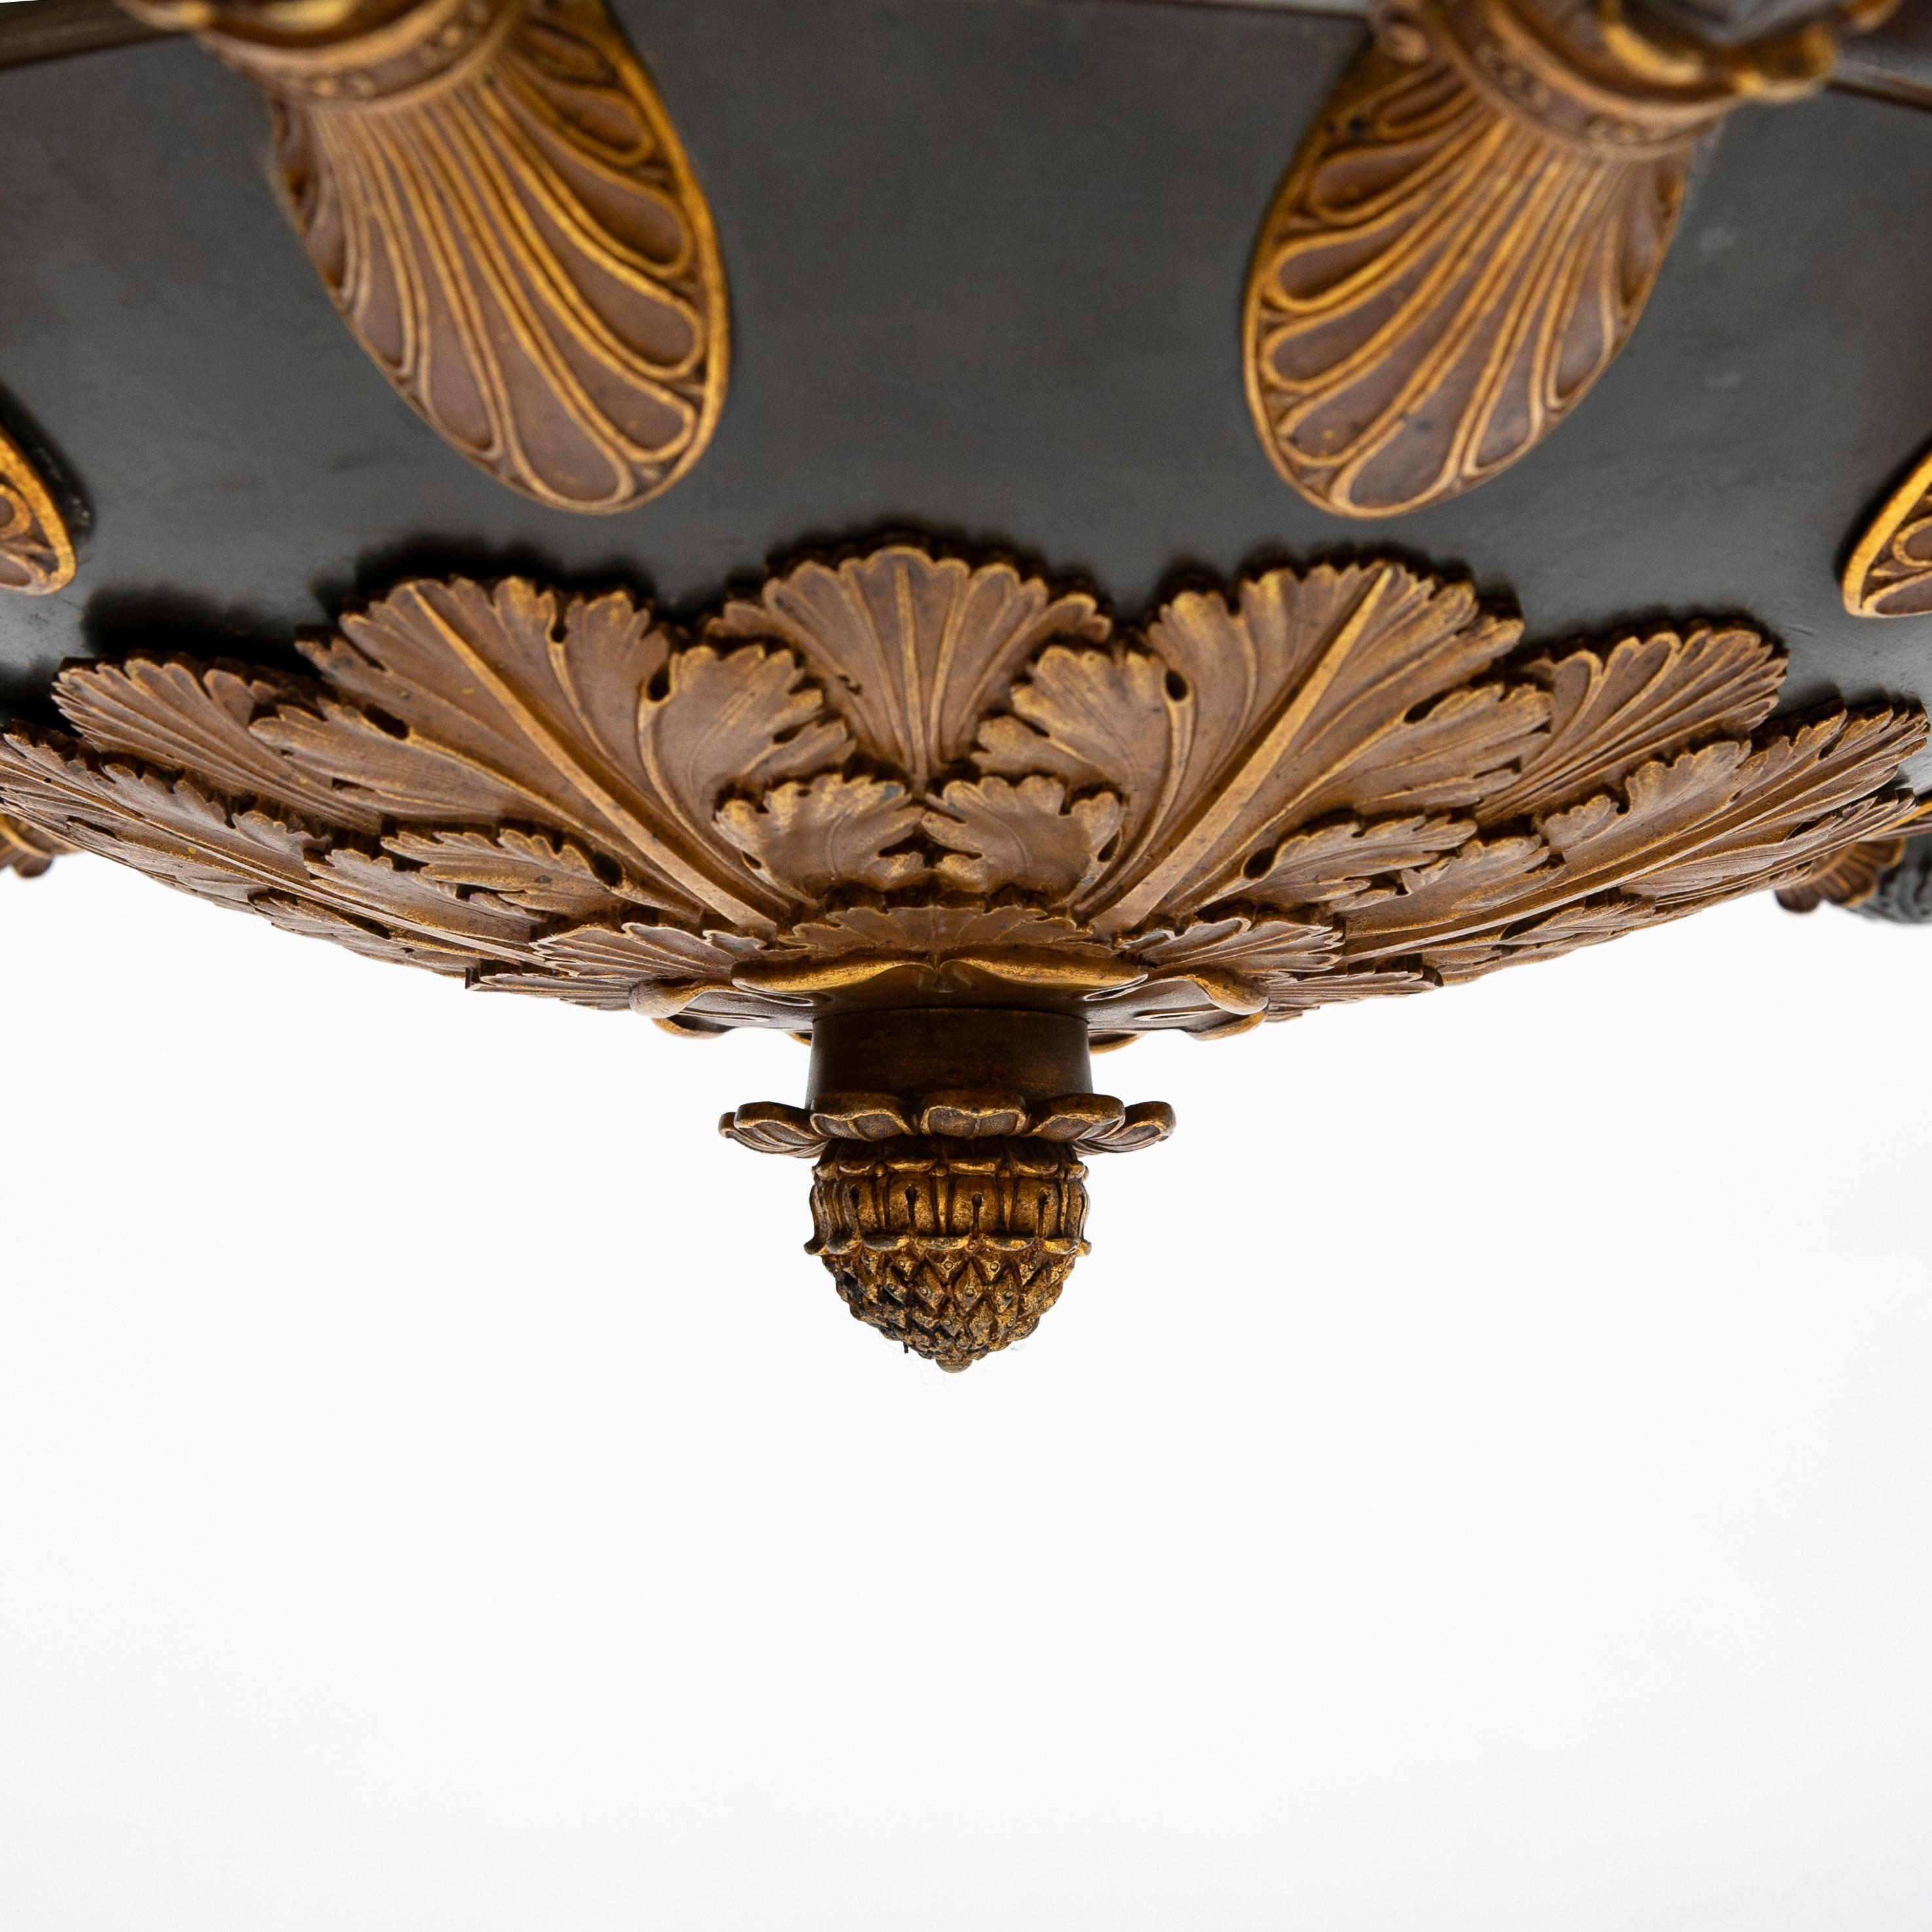 19th Century Charles X Chandelier Patinated Bronze and Ormolu